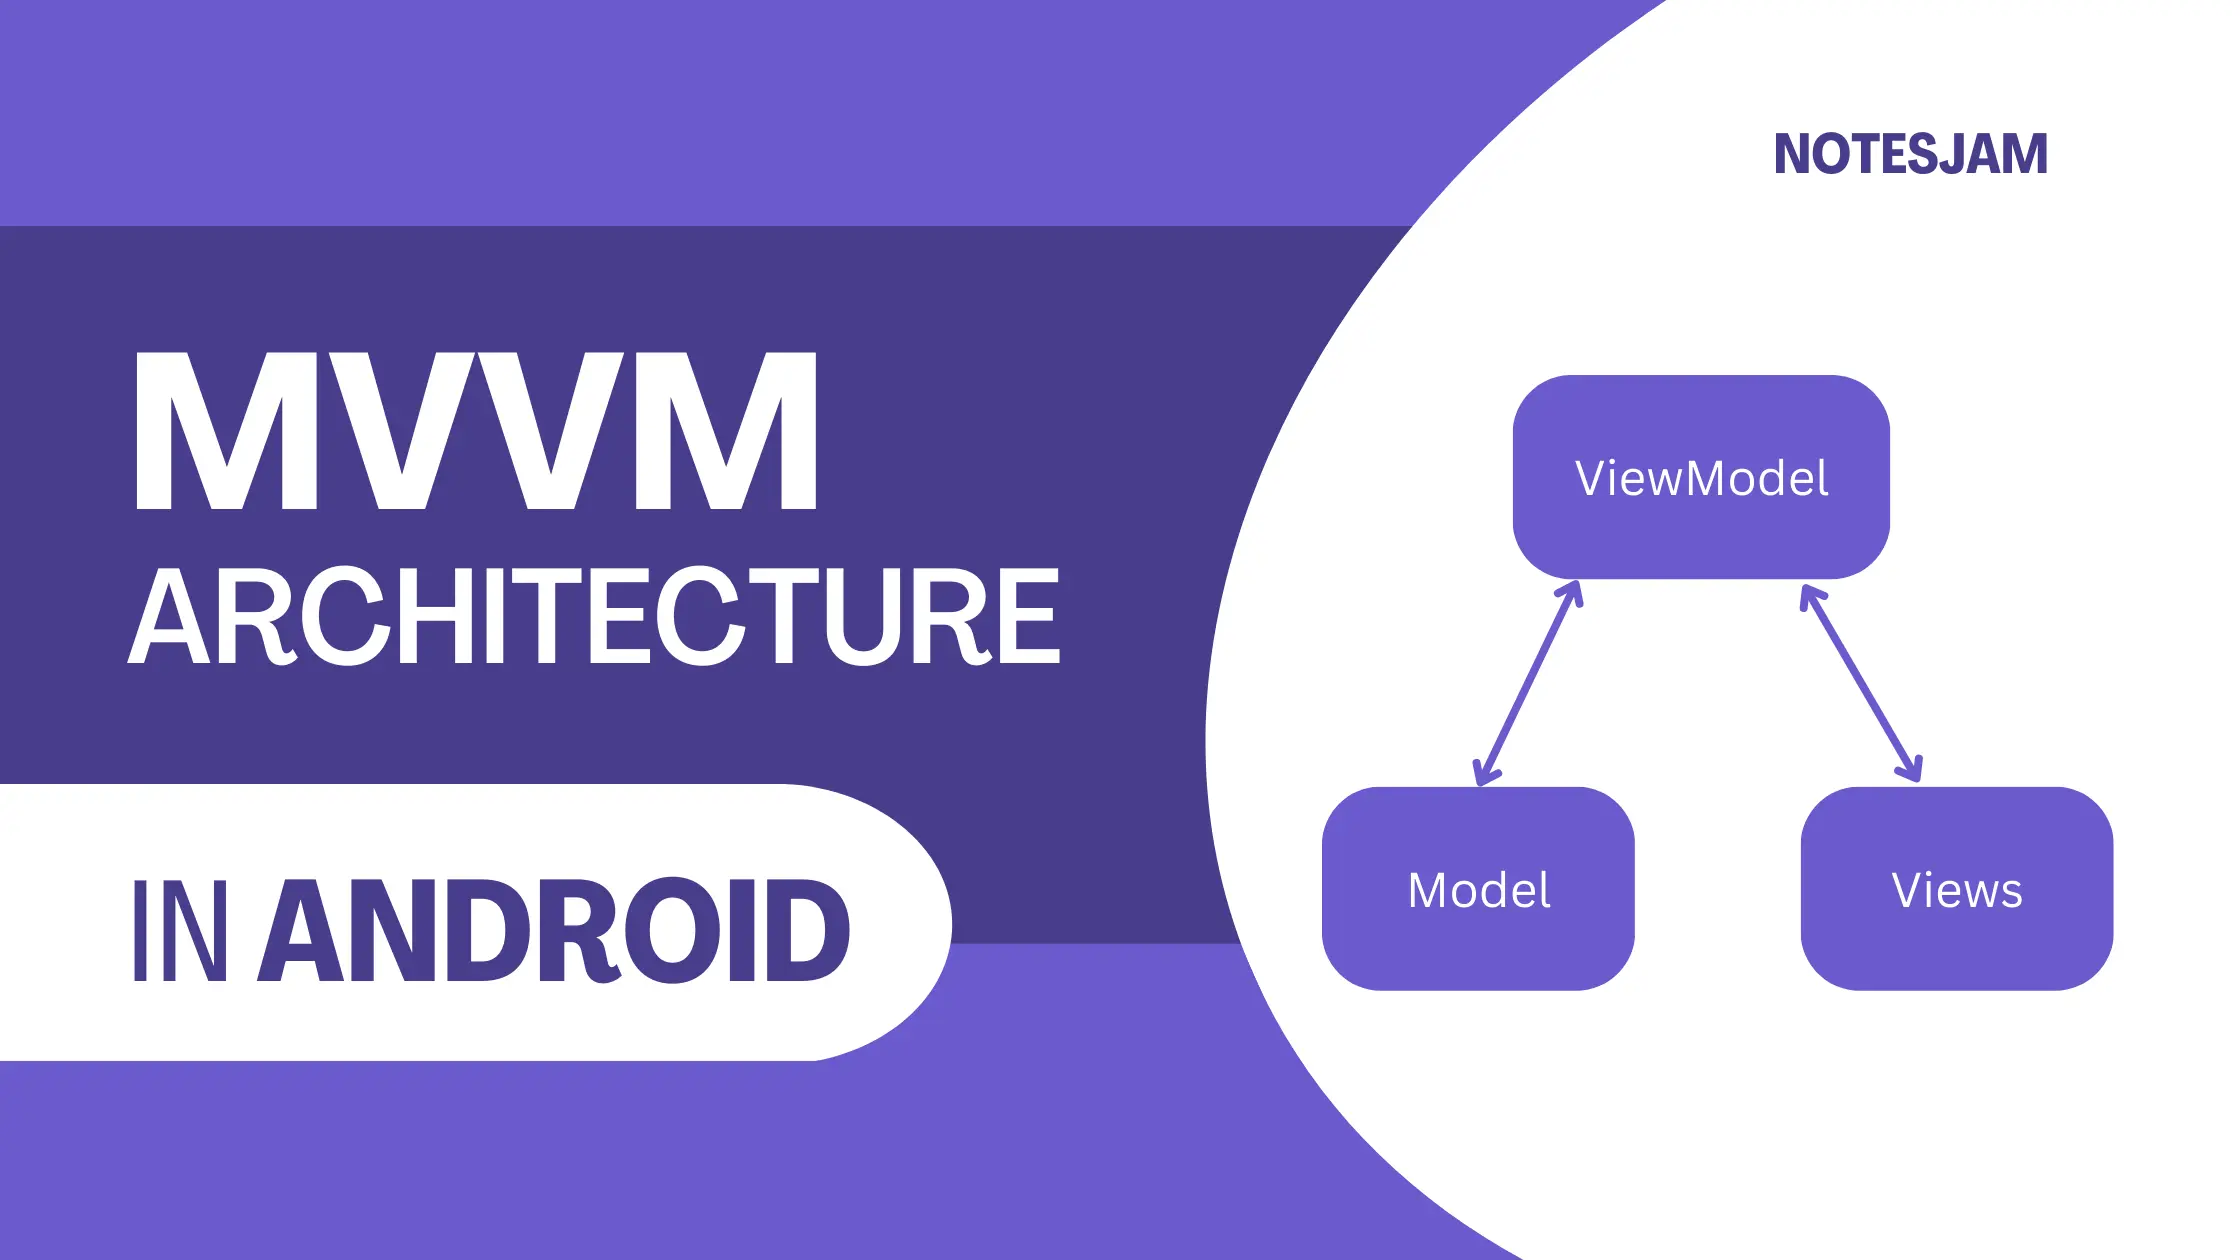 MVVM architecture in Android